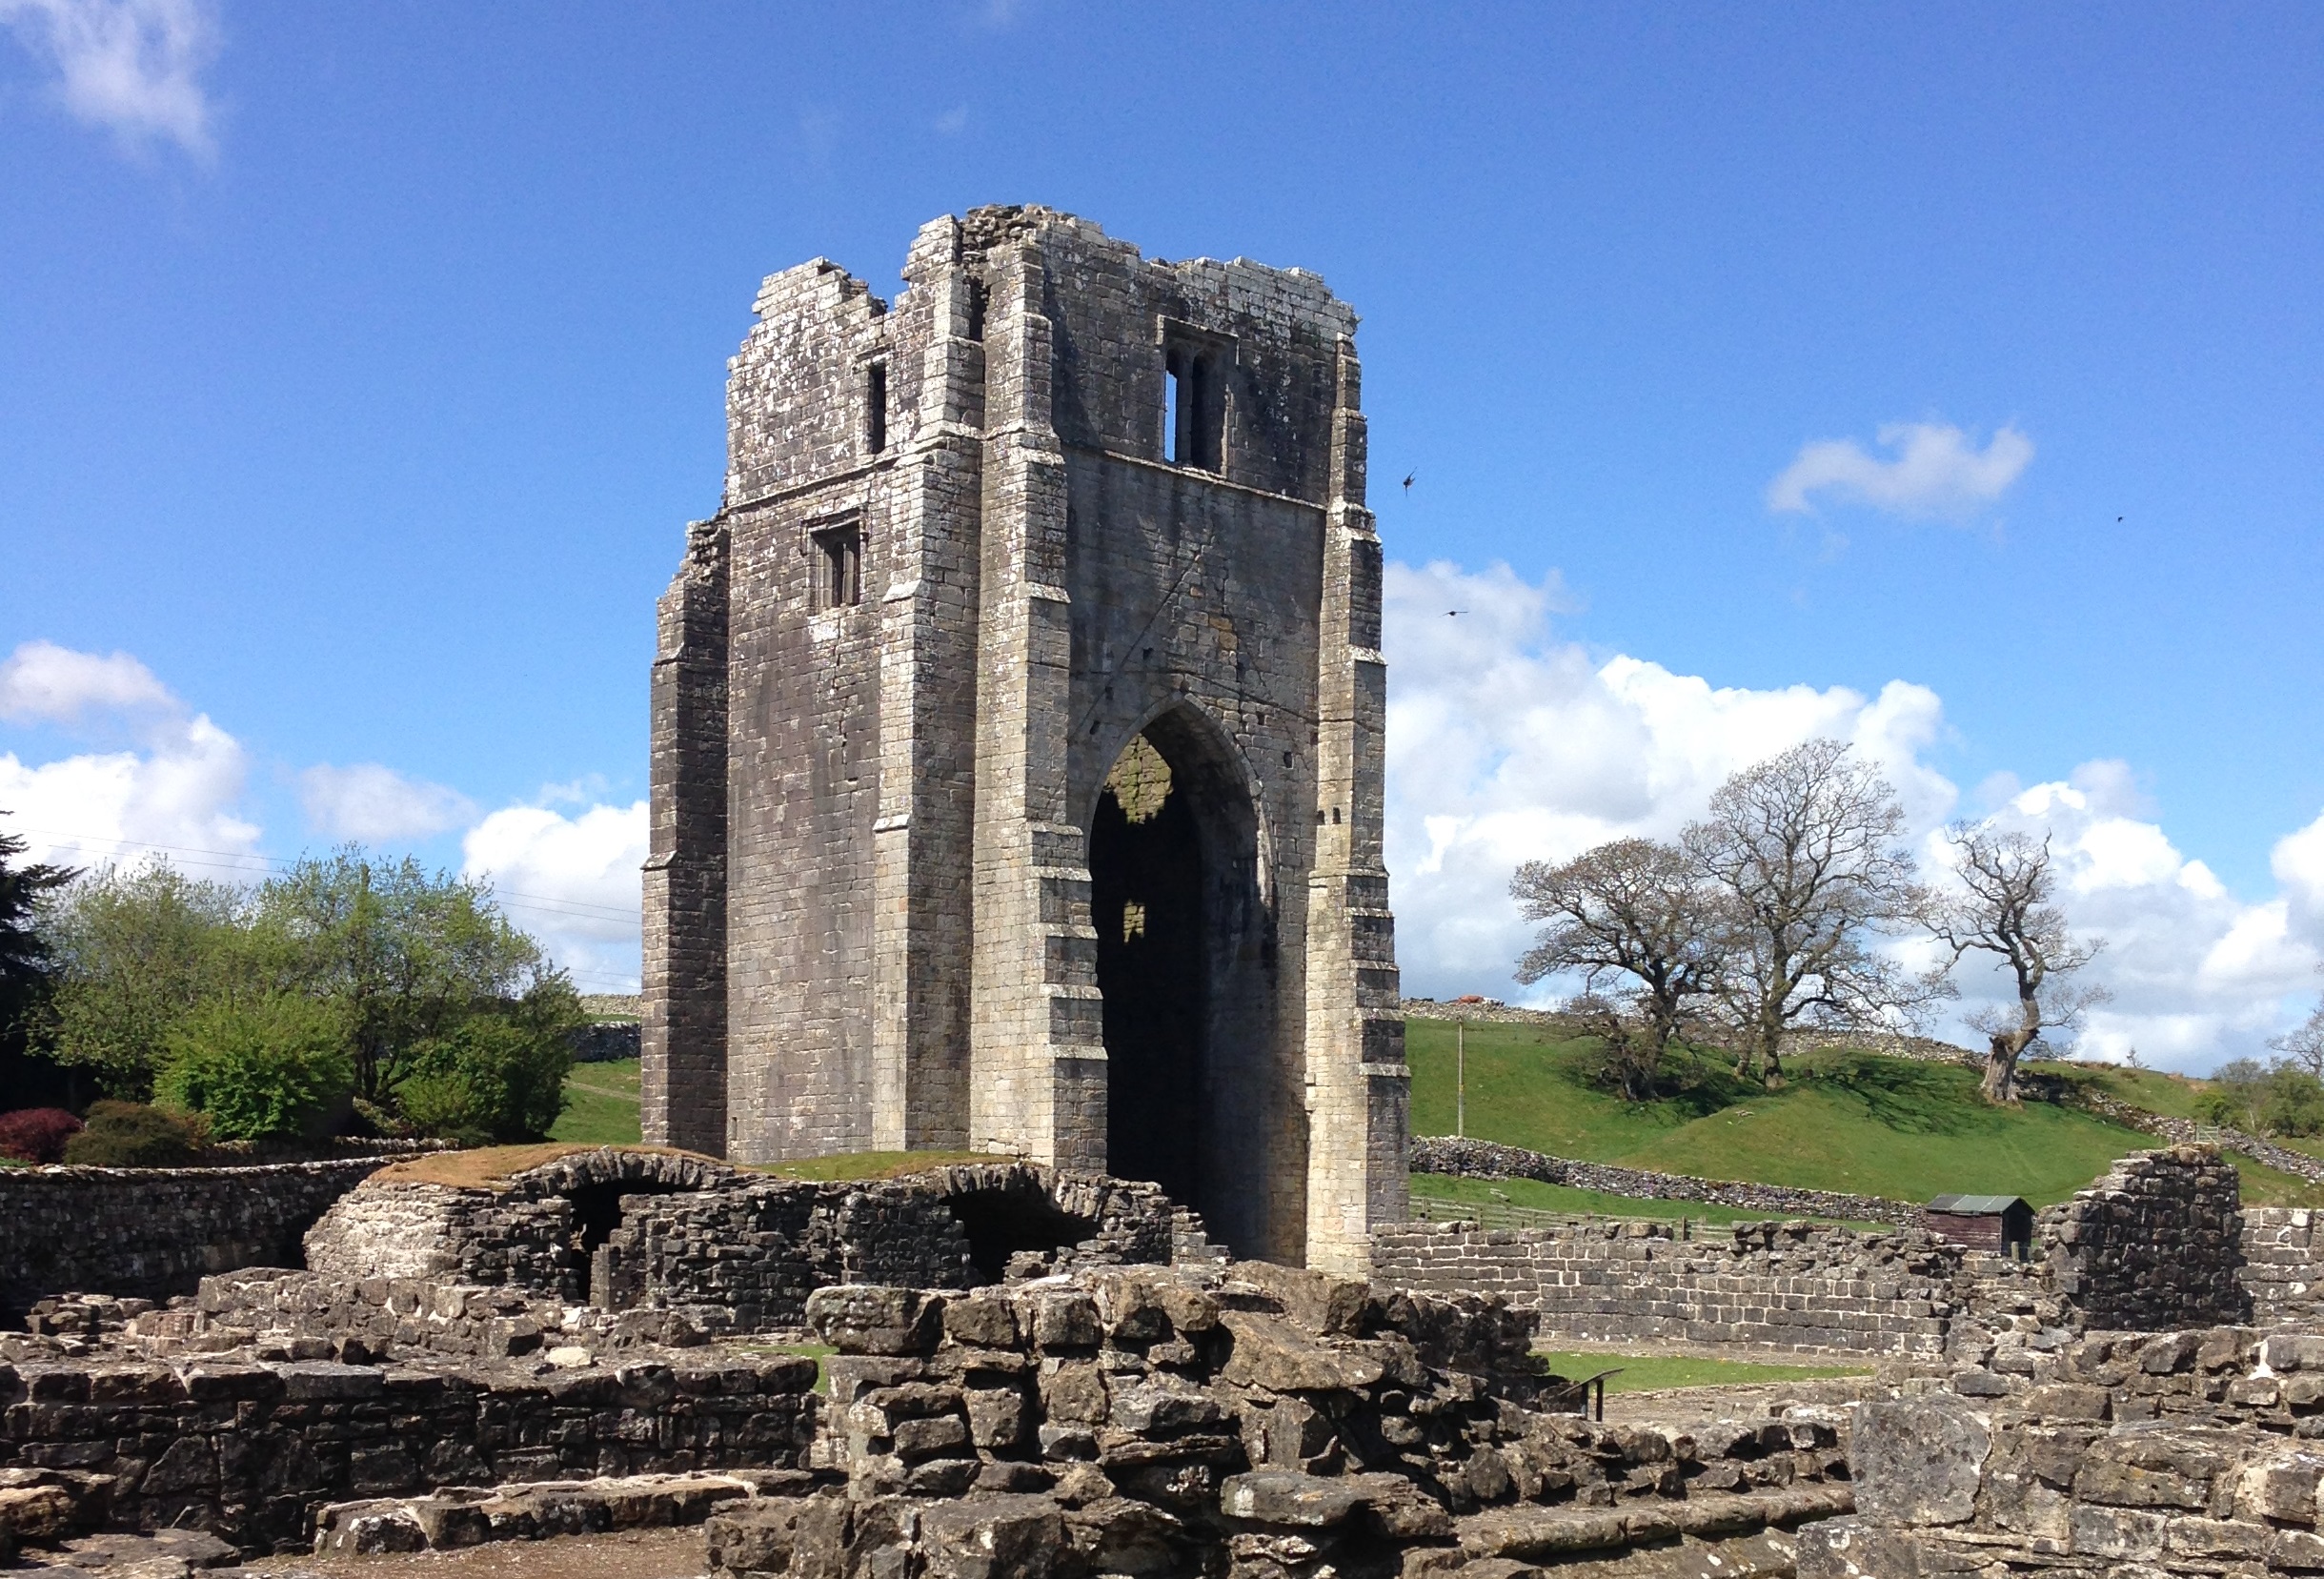 A large central, but ruined tower, with low level walls in the foreground, and a beautiful blue sky beyond.